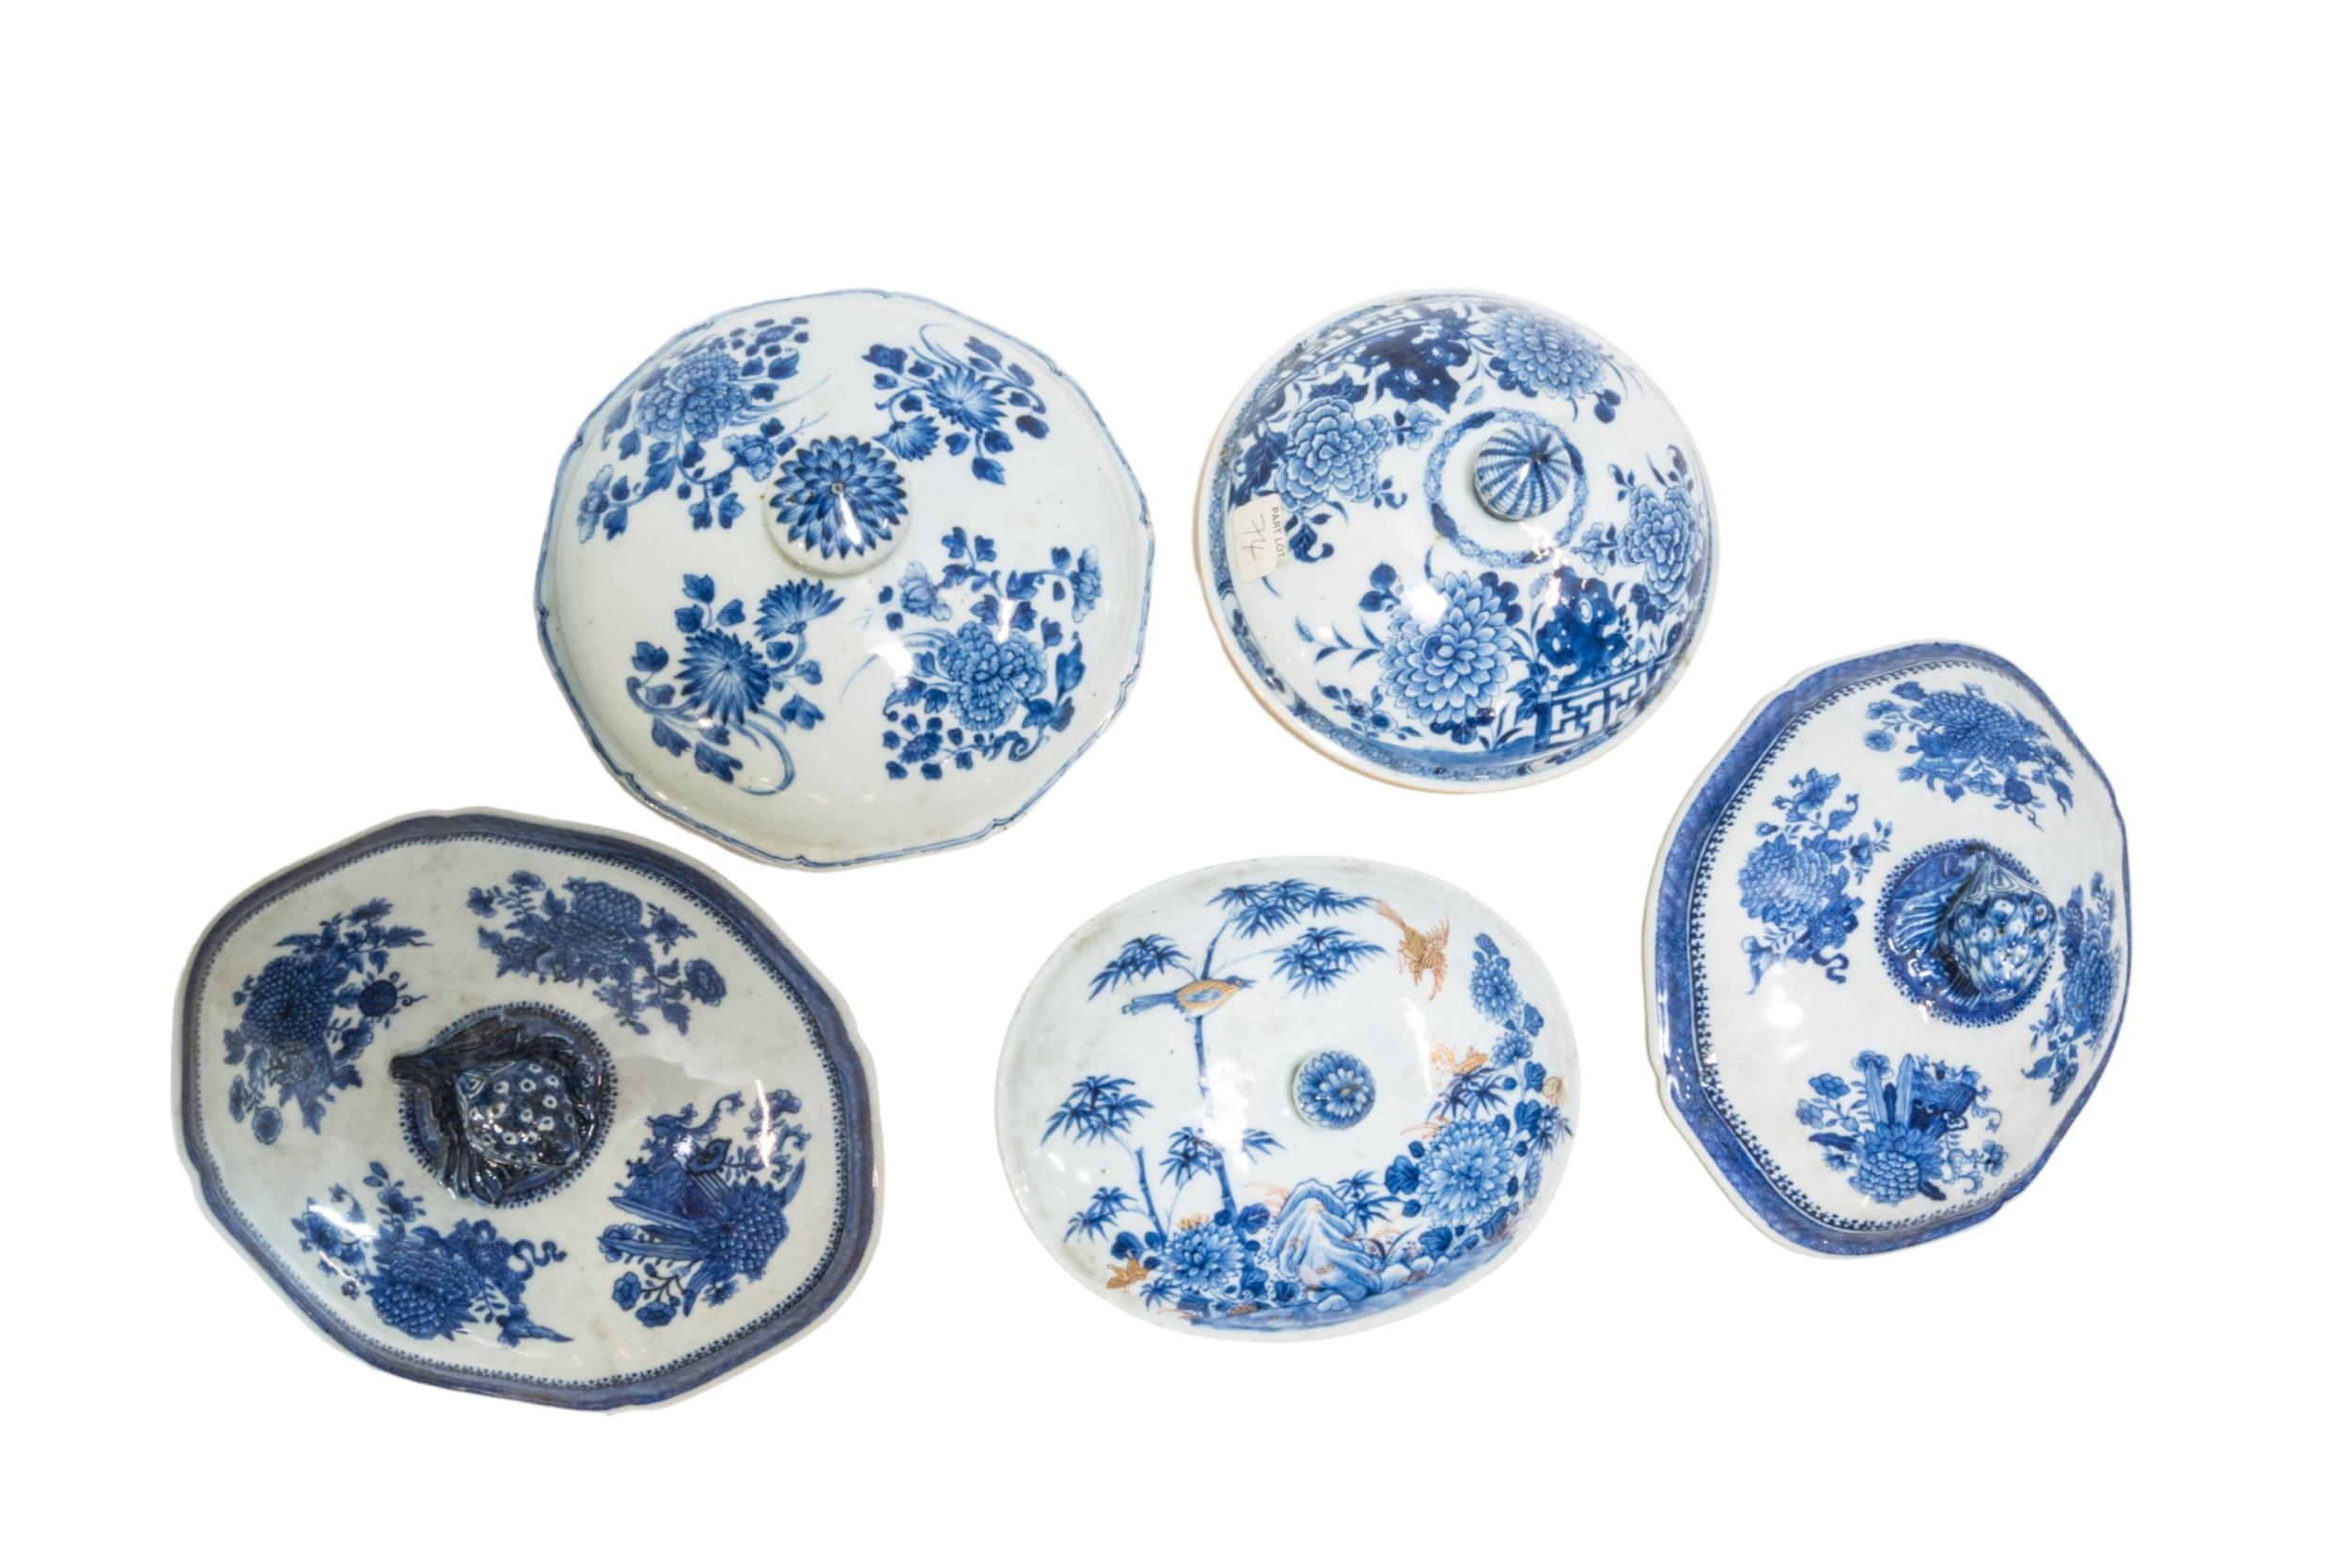 THREE CHINESE EXPORT TUREEN BASES AND A MIXED GROUP OF SIXTEEN COVERS, QING DYNASTY, LATE 18TH / - Image 3 of 7